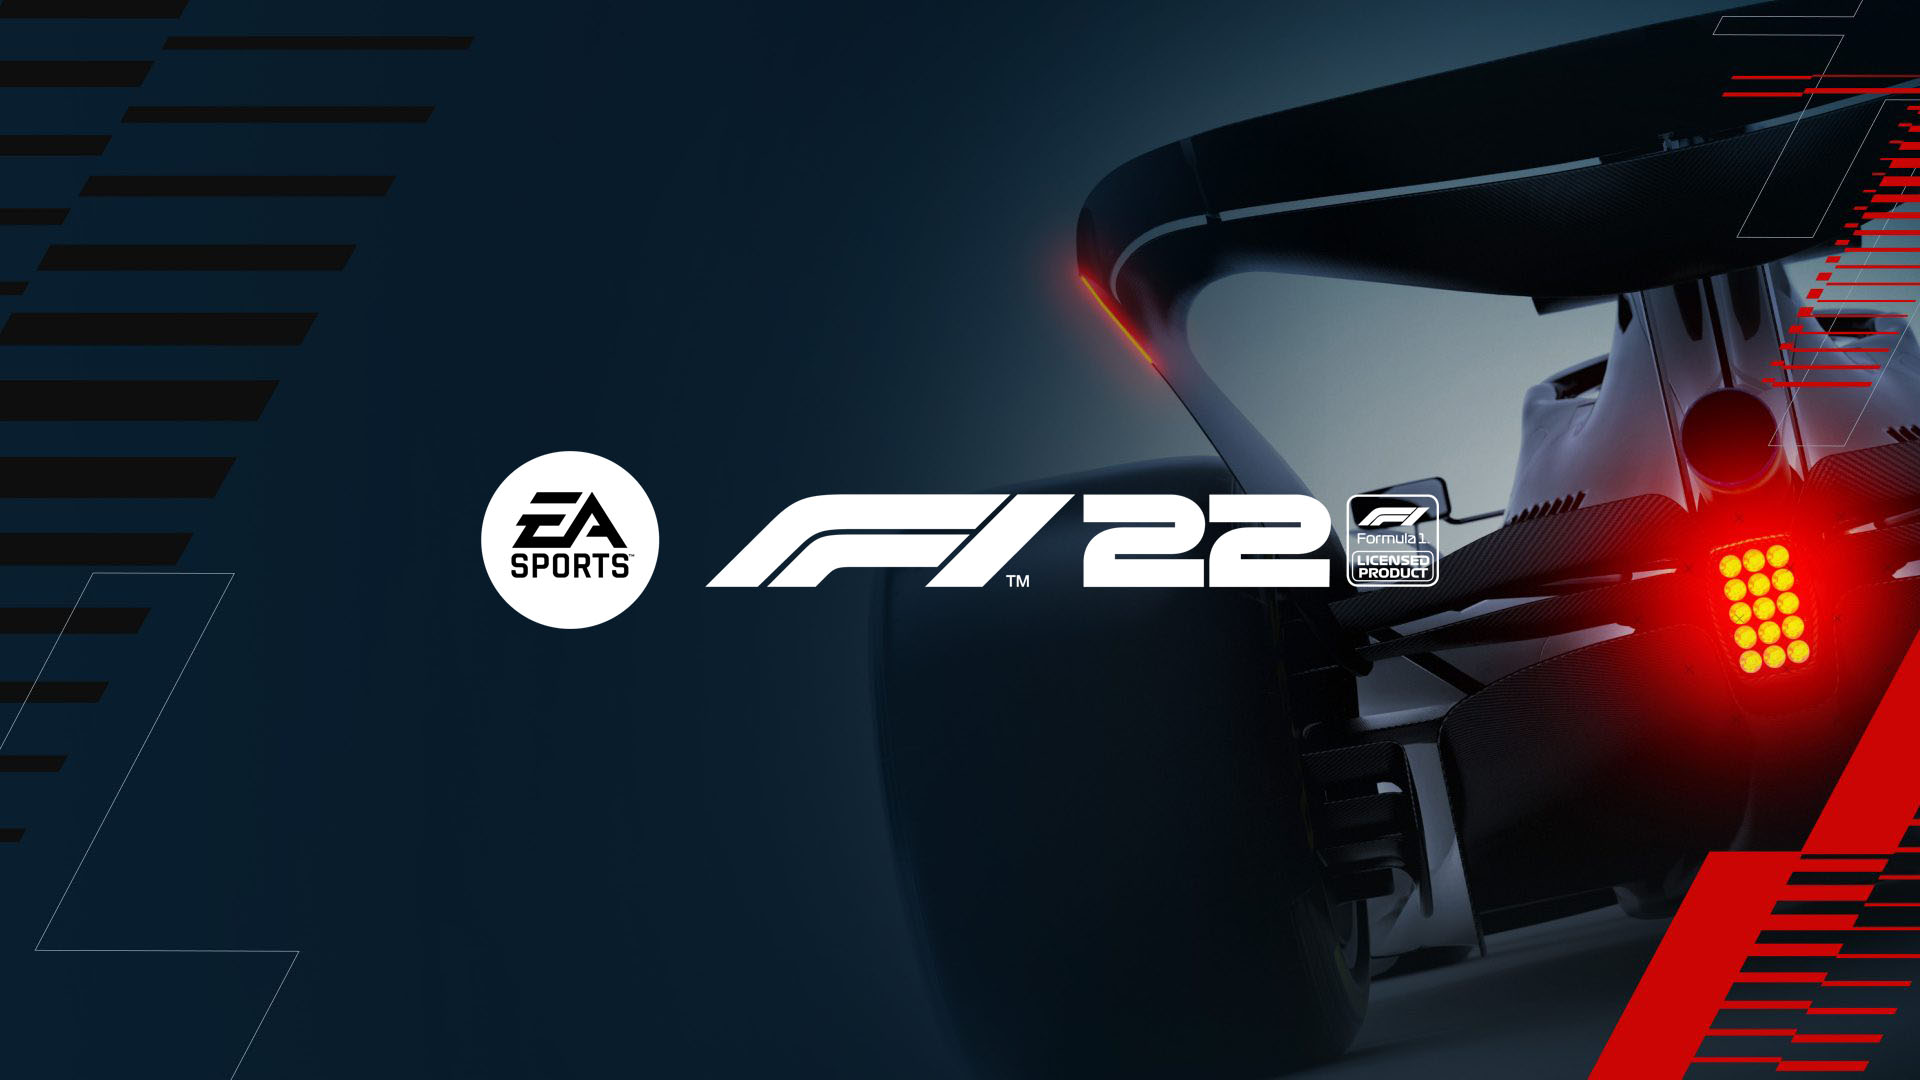 F1 2022 announced for PC and consoles